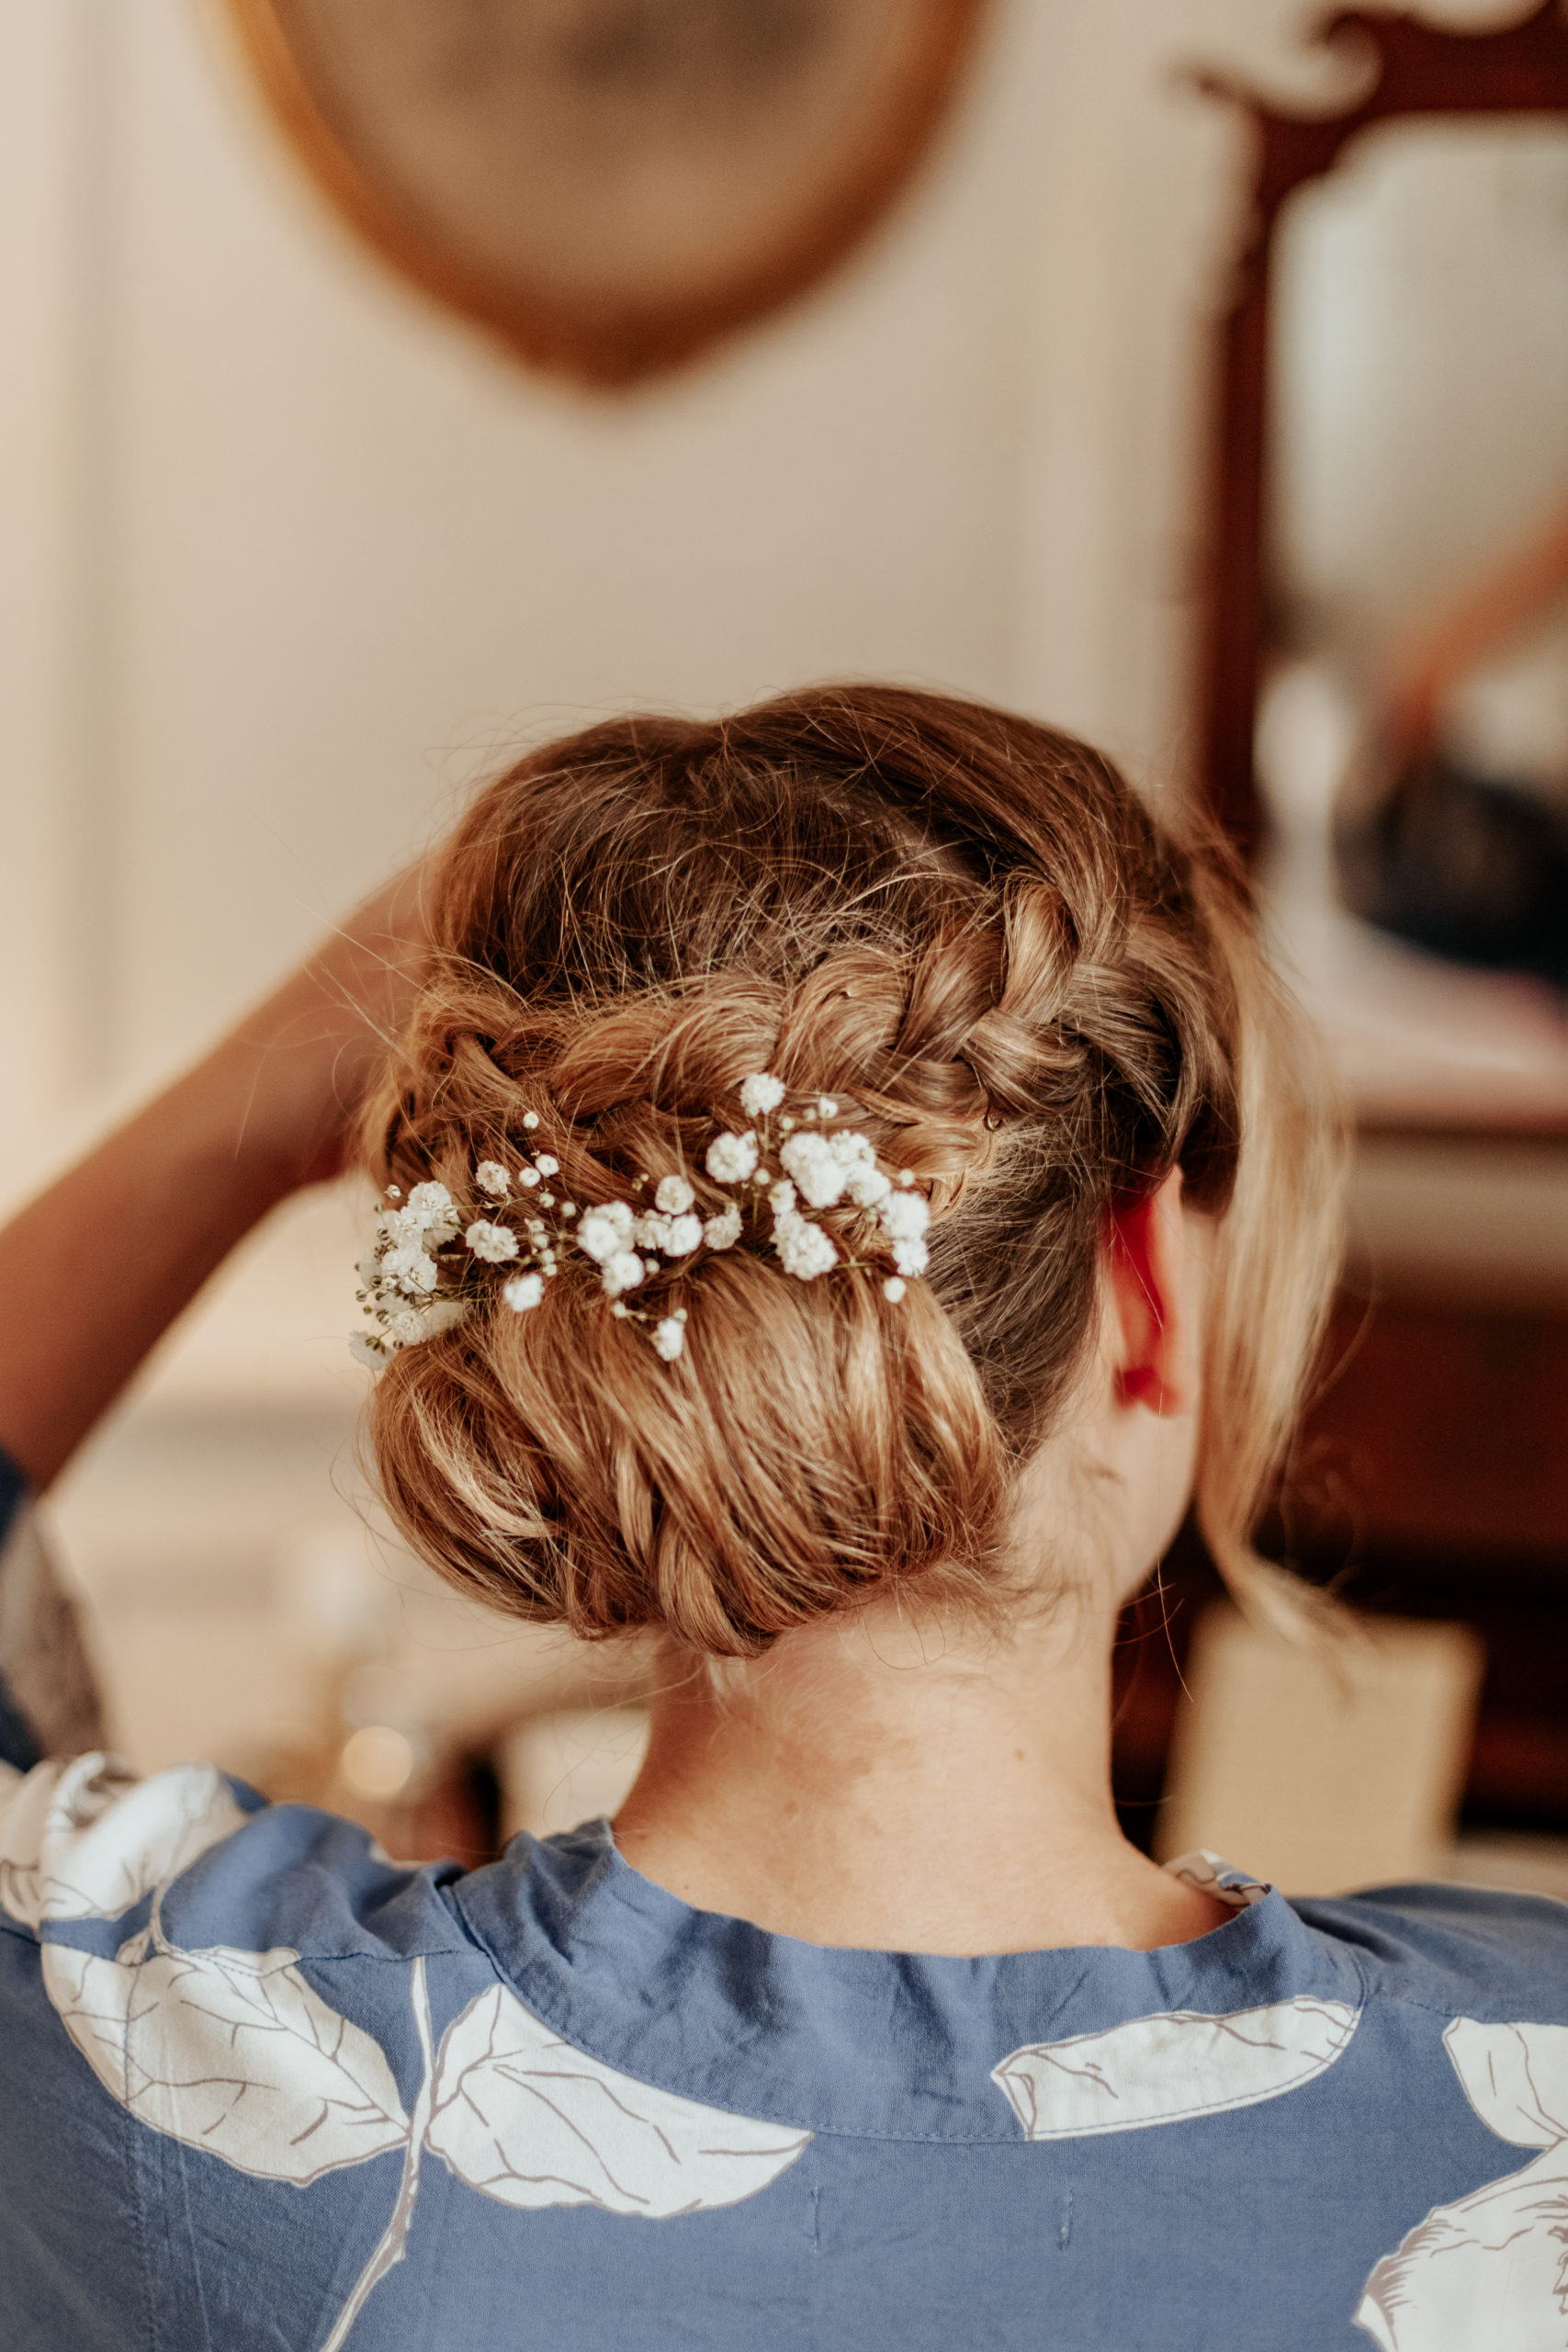 Sarah's braided bun, with flowers woven into it